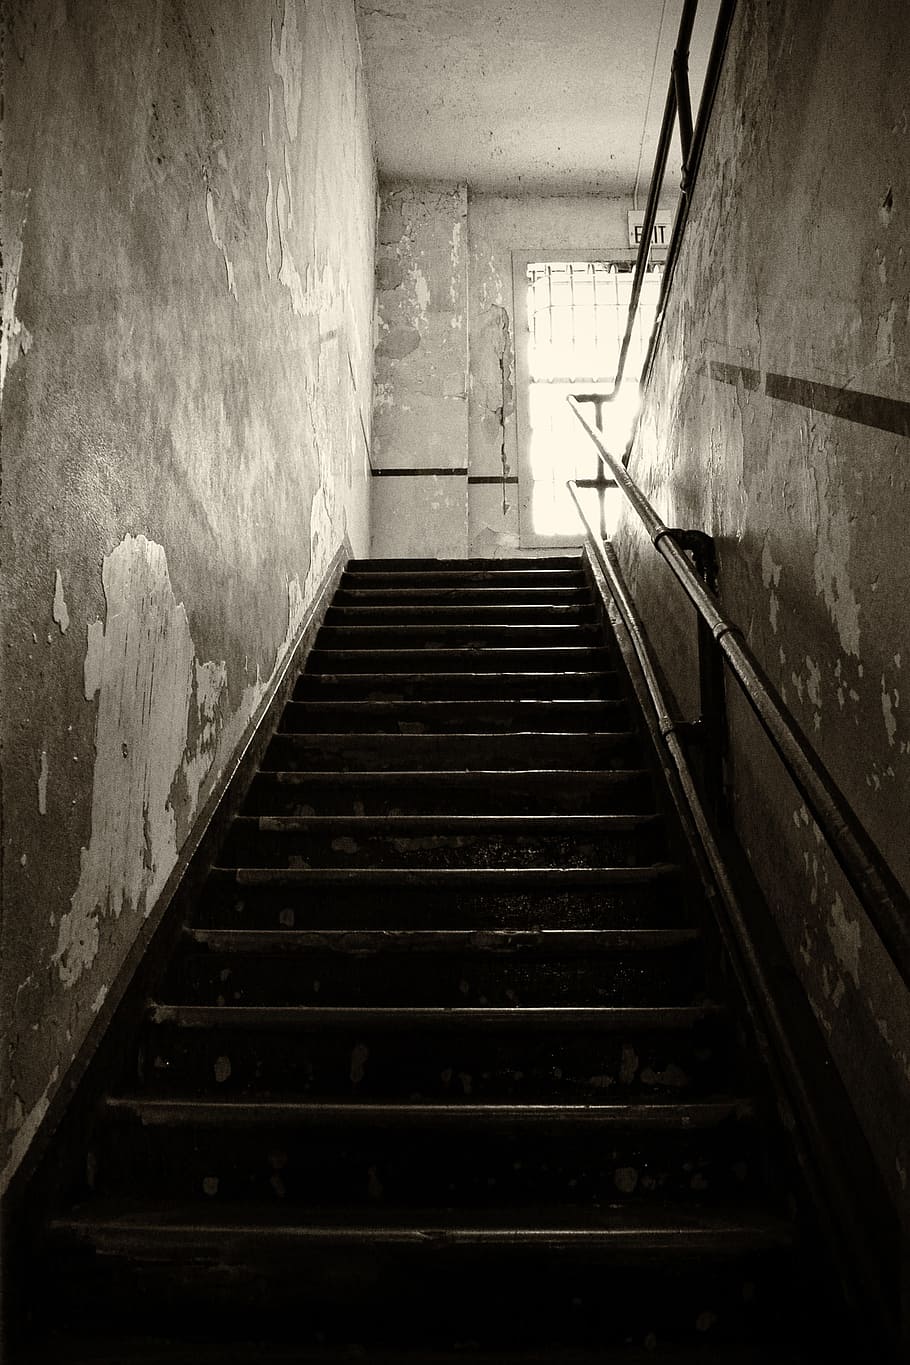 Lost, Old, Stairs, Ruin, lost places, leave, break up, prison, broken, building